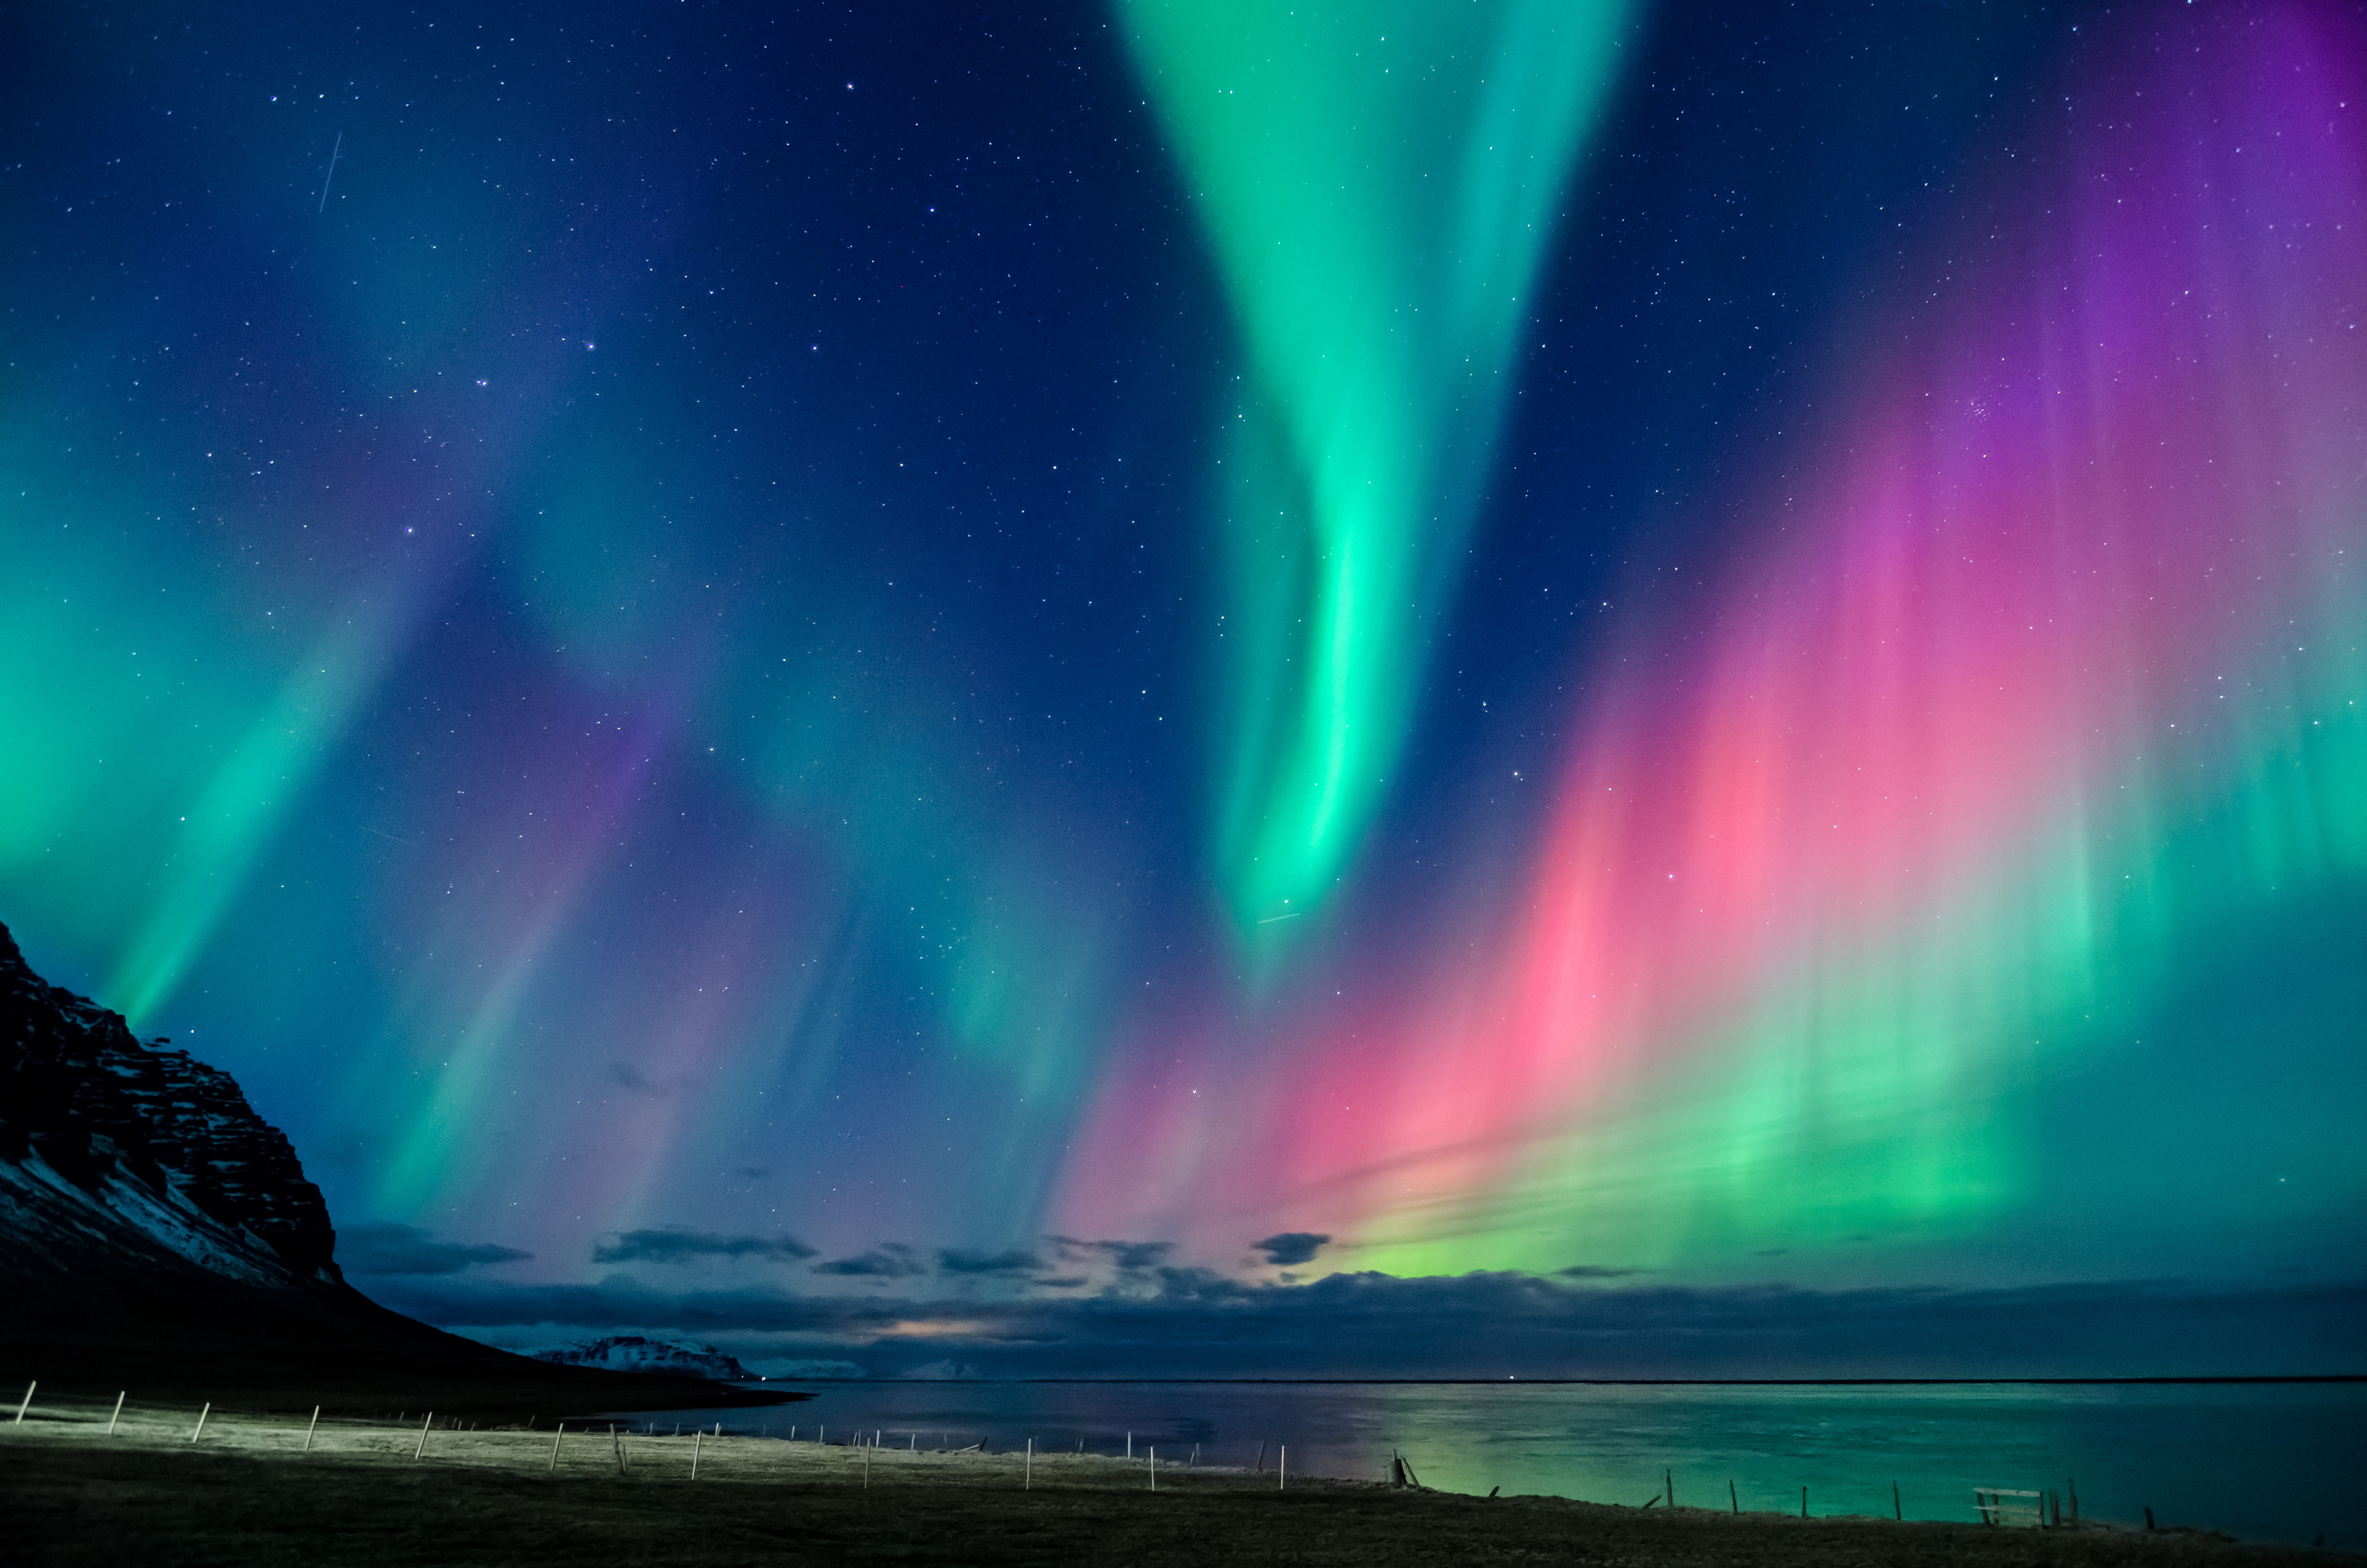 northern-lights-in-all-the-colors-of-the-rainbow-dance-across-the-sky-in-iceland-6.jpg